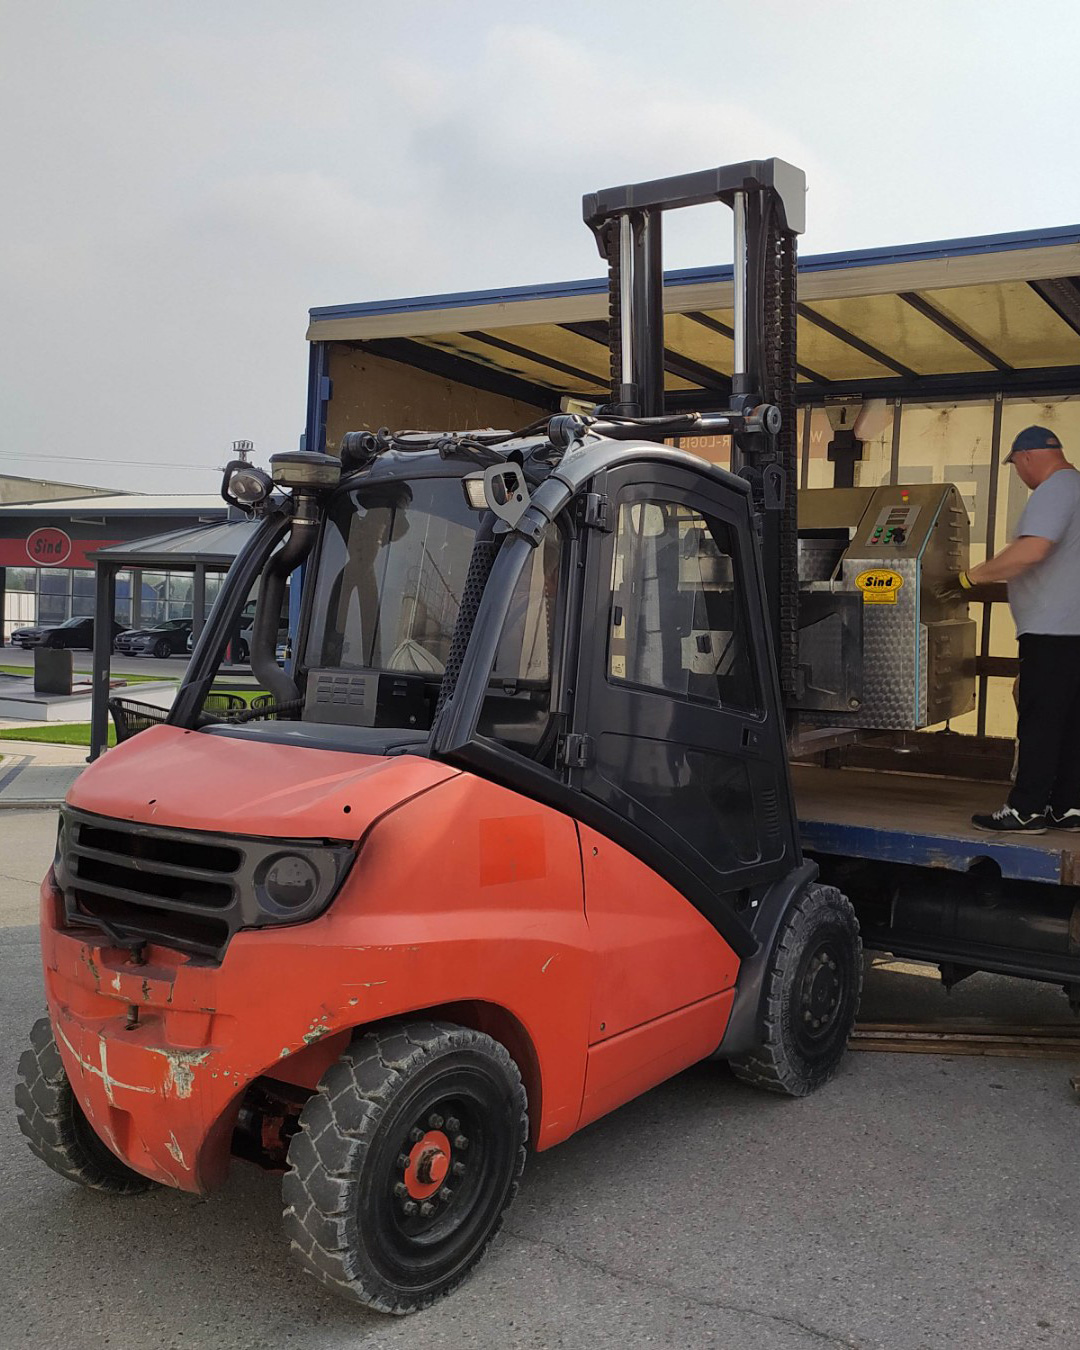 Delivery of machine for a customer in Slovenia